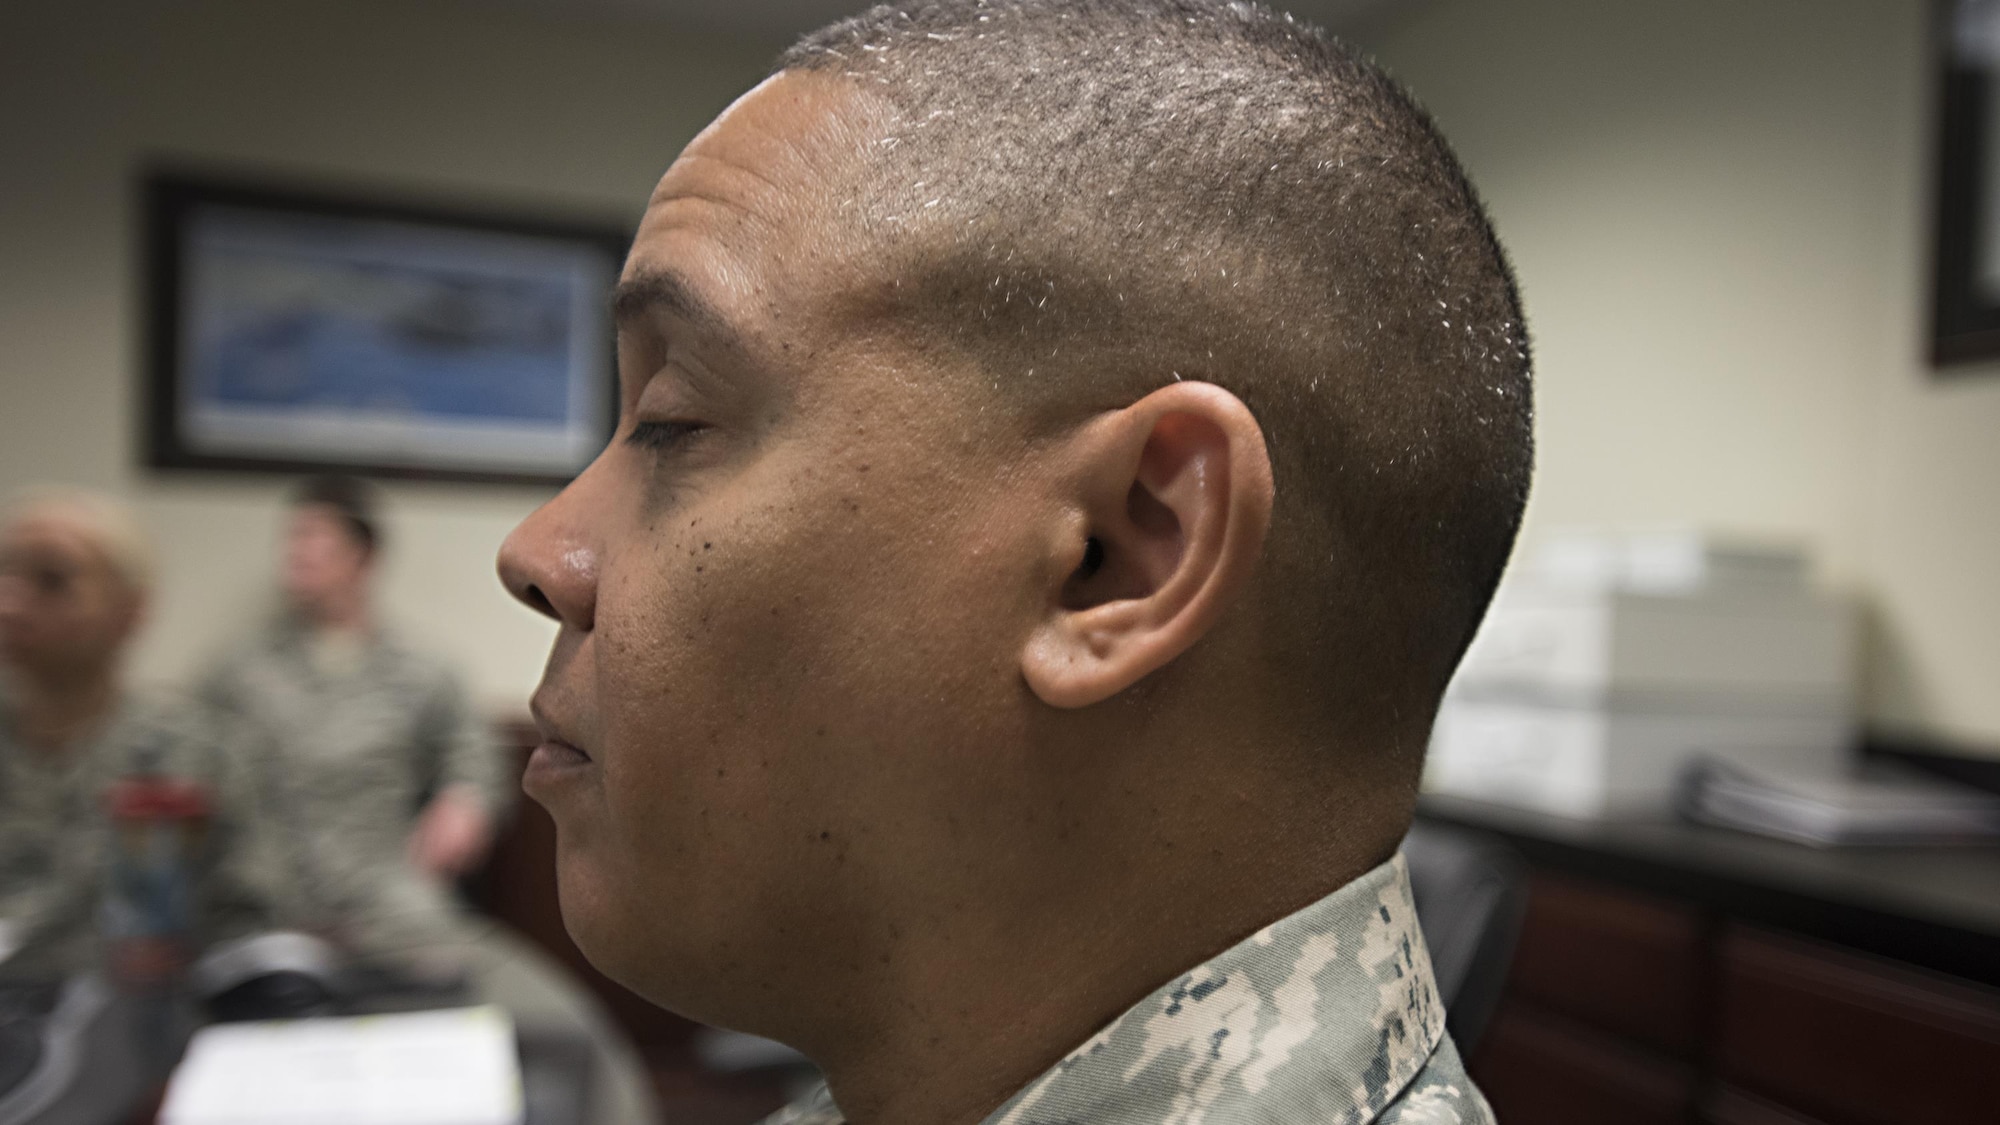 A member of the 305th Operations Support Squadron leadership team participates in a “mindful minute” meditation session during a staff meeting April 20, 2016, at Joint Base McGuire-Dix-Lakehurst, N.J. The mindful minute is part of an ongoing mindful initiative to improve the mental fitness of Airmen. (U.S. Air Force photo/Staff Sgt. Katherine Tereyama)